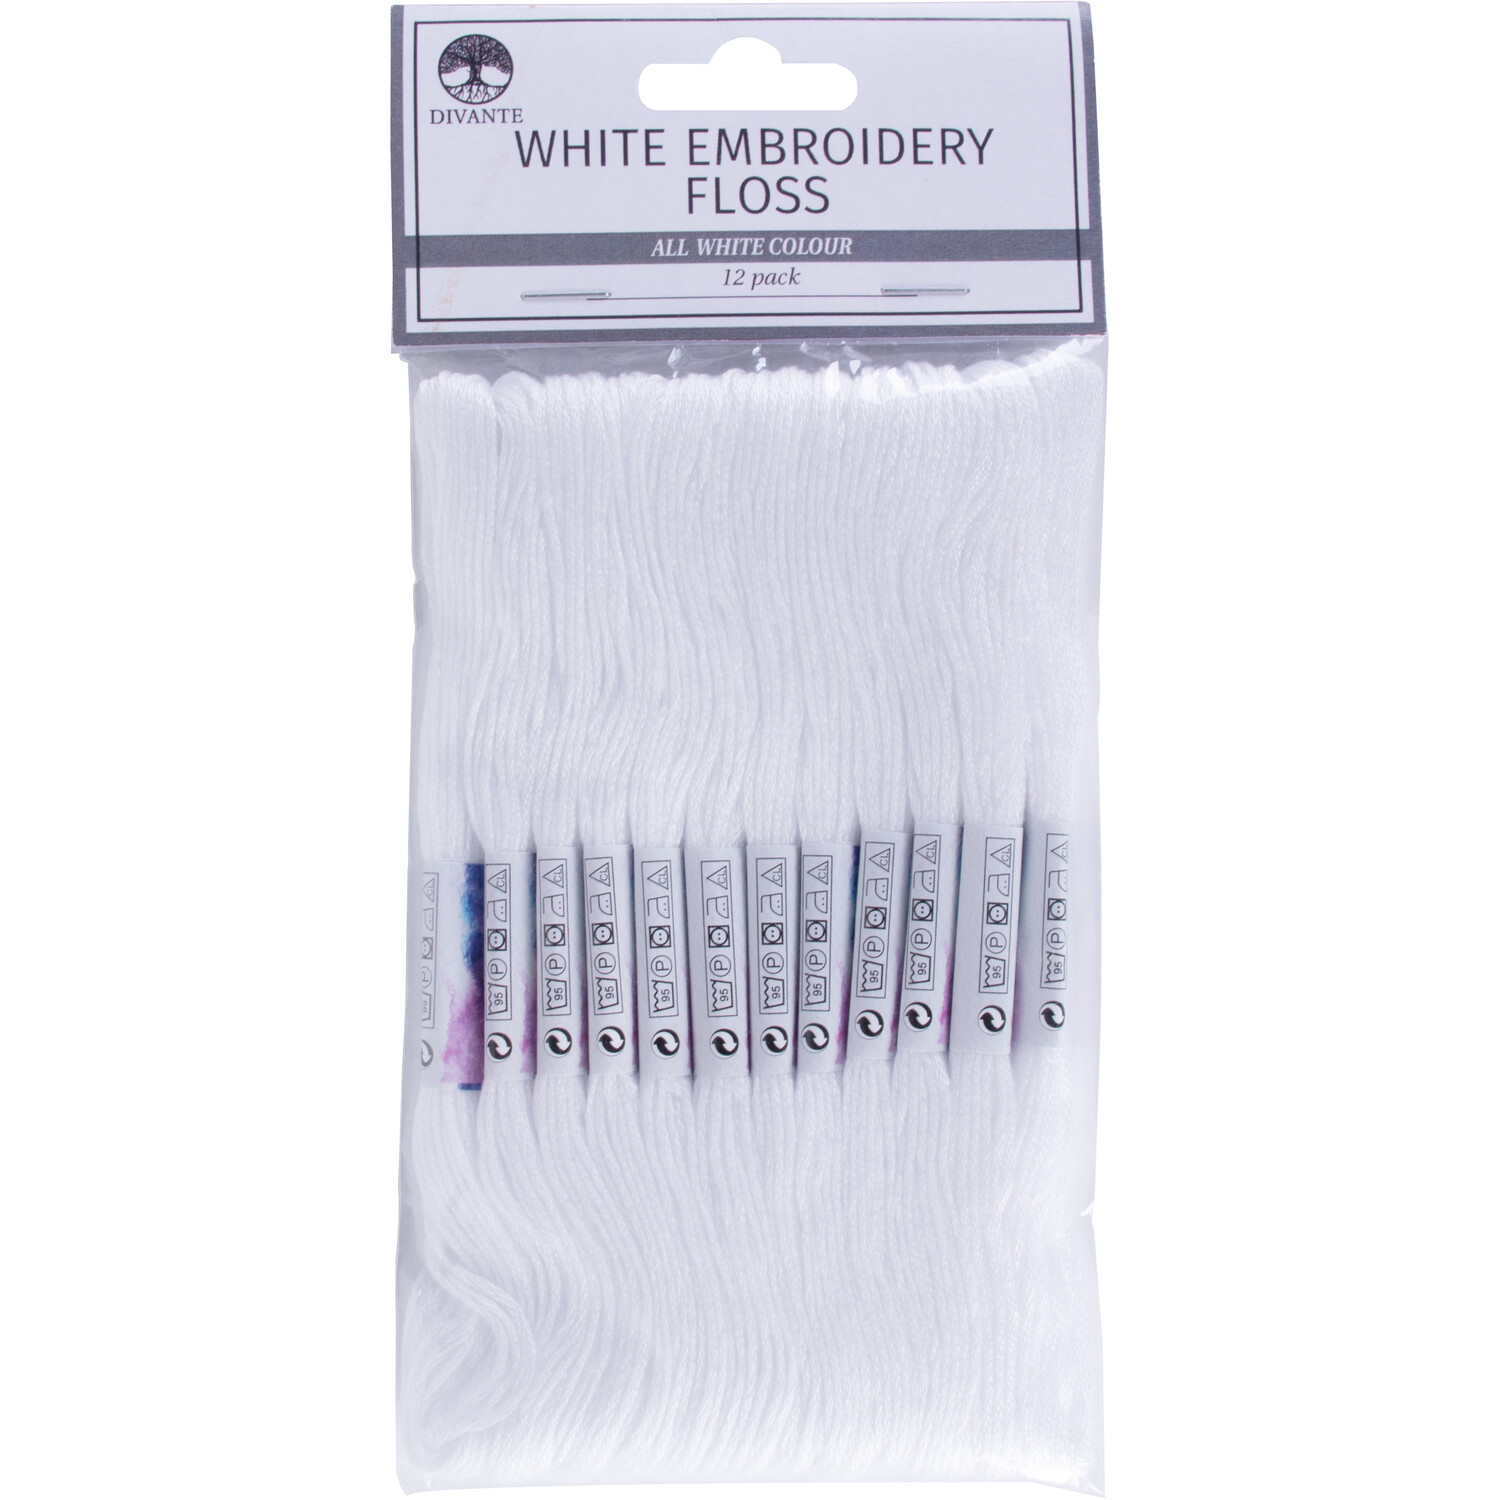 12 Pack of Embroidery Floss Bundles - White Image